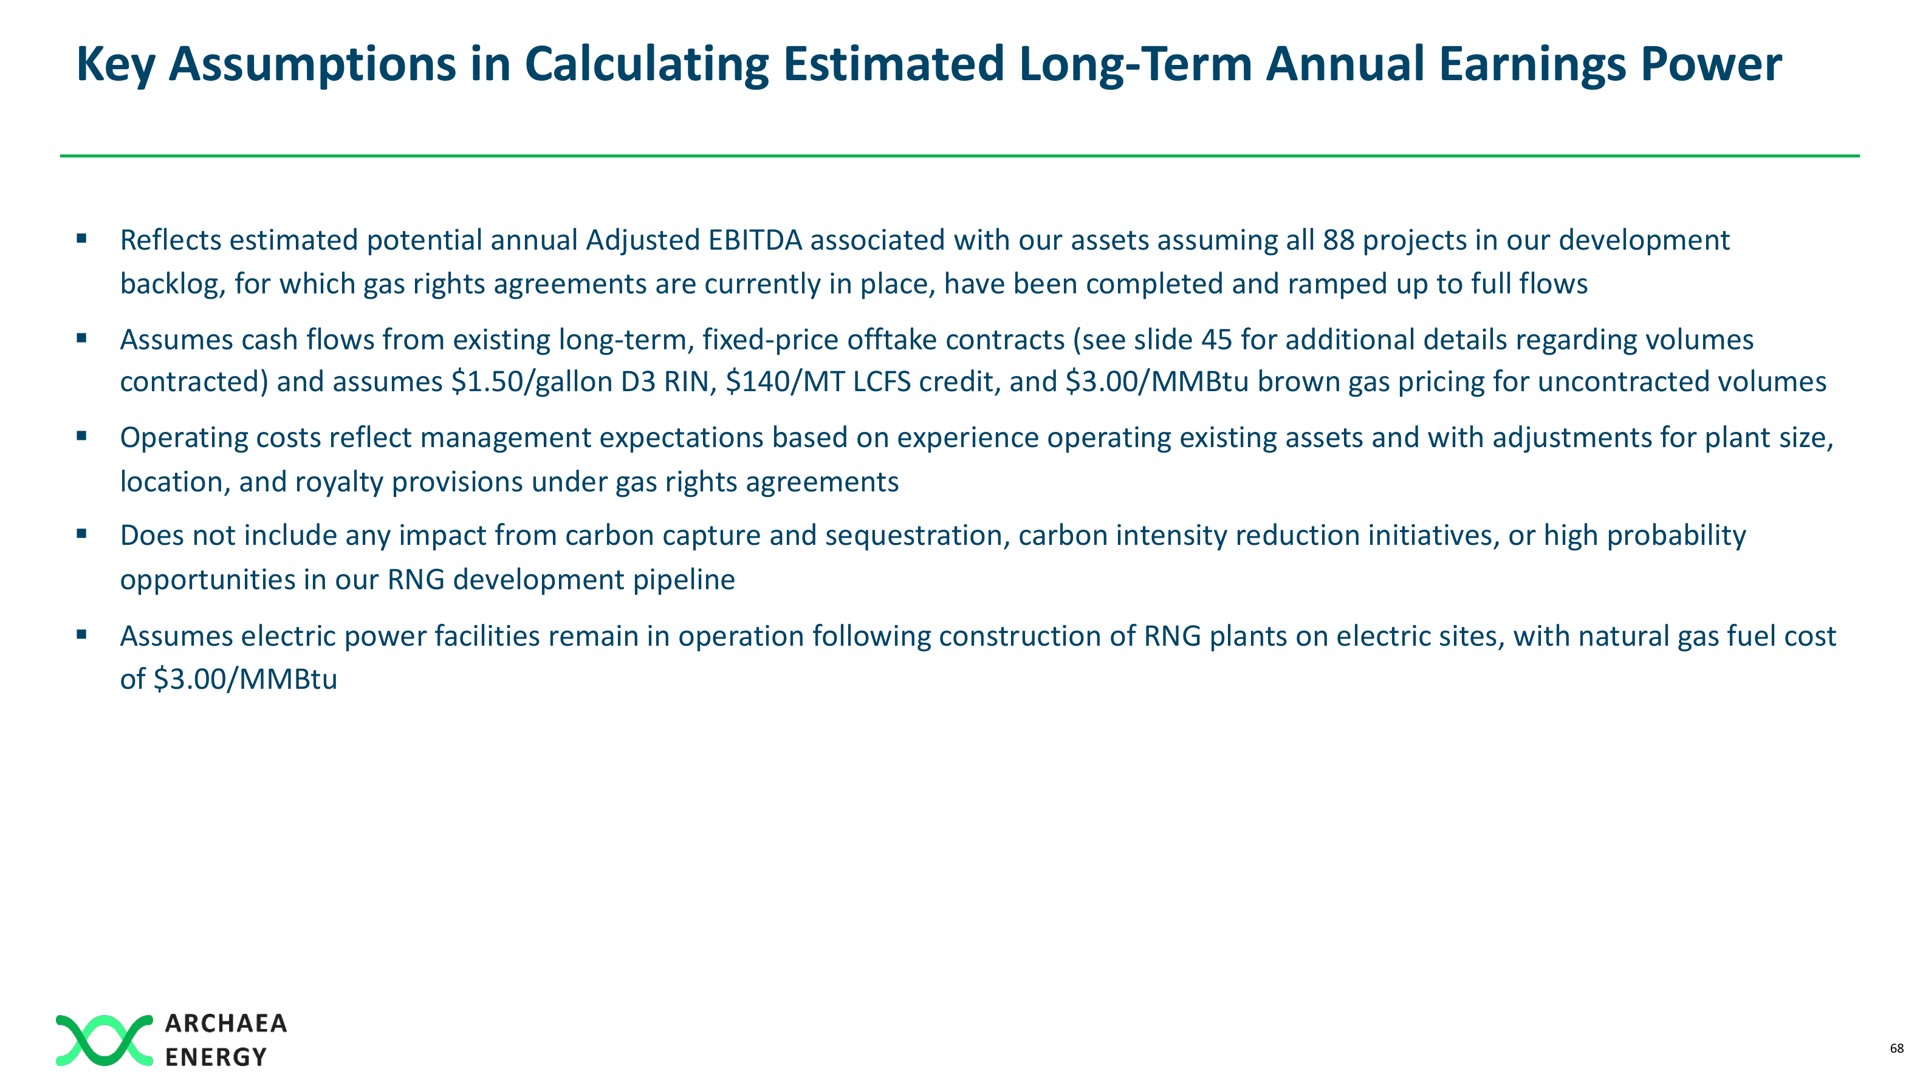 key assumptions in calculating estimated long term annual earnings power | Archaea Energy